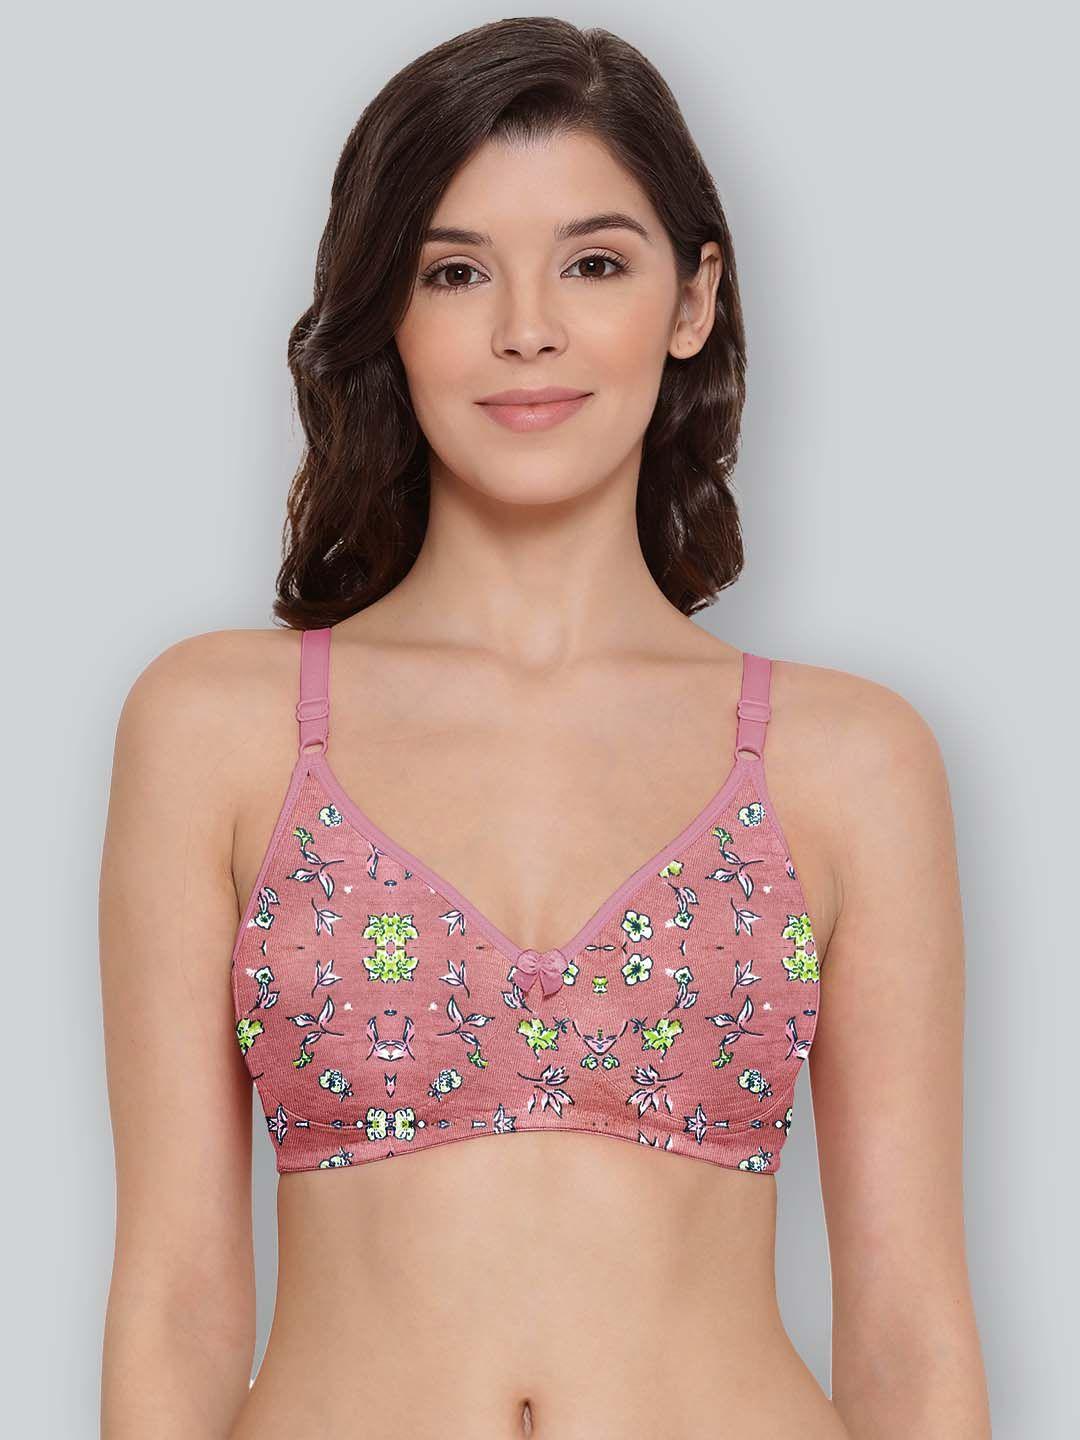 lyra floral printed full cotton coverage bra all day comfort